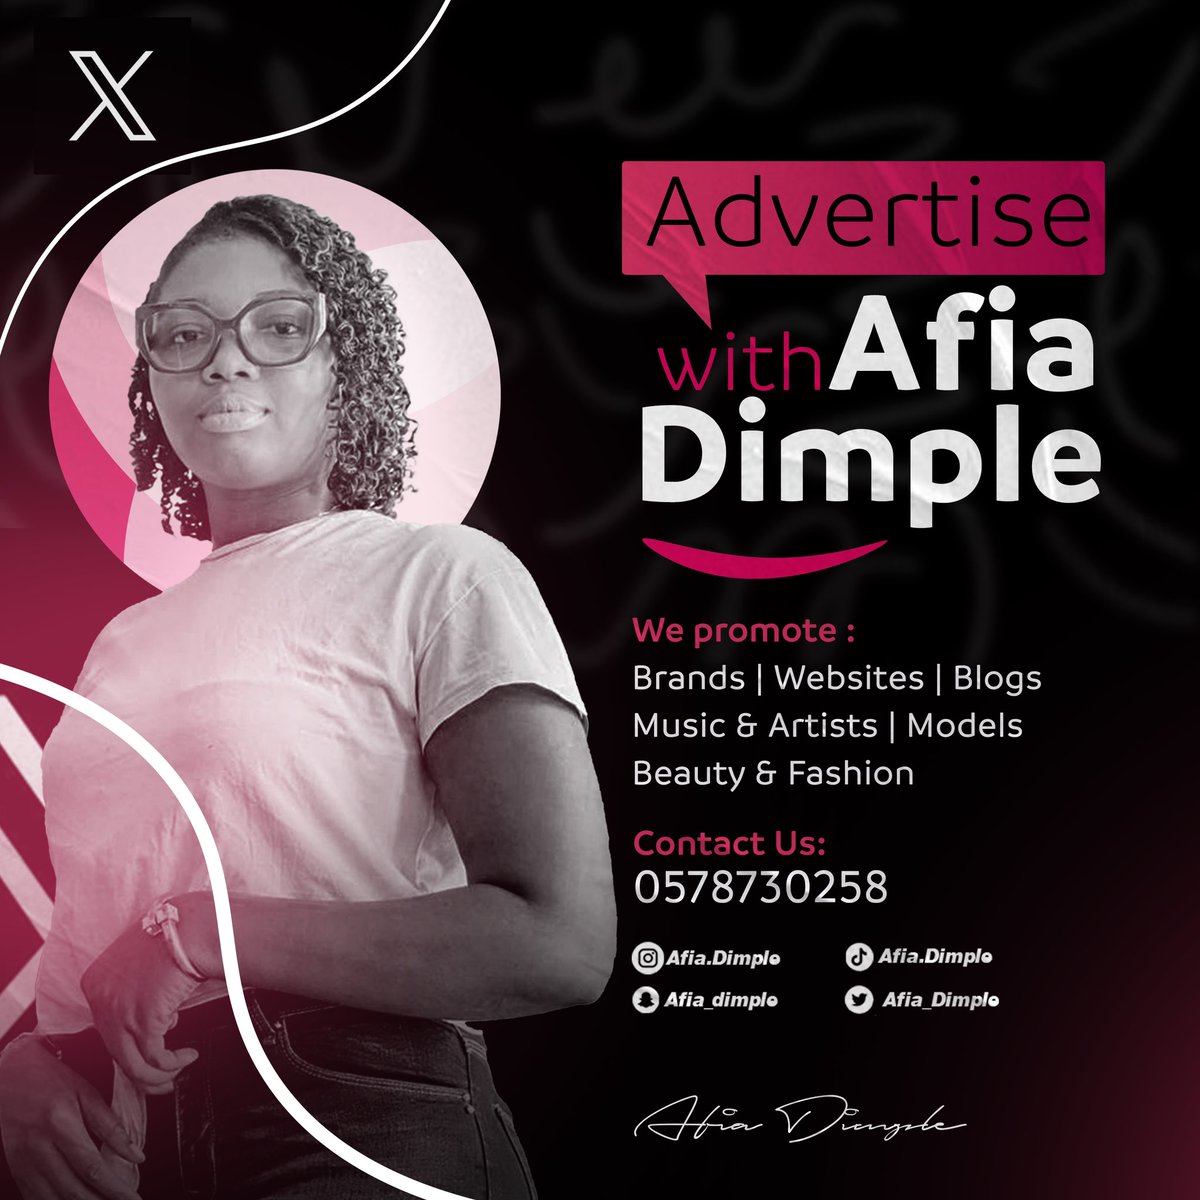 Day 100 🫣🫡🫶 as @Afia_Dimple dey share Momo, don't y'all forget to advertise with her. Let her promote your brands, websites, blogs, music & artist, models, beauty & fashion. she got y'all 🫵🫶❤ let's support her hustle deeply 🫴❤ #AdvertiseWithAfiaDimple